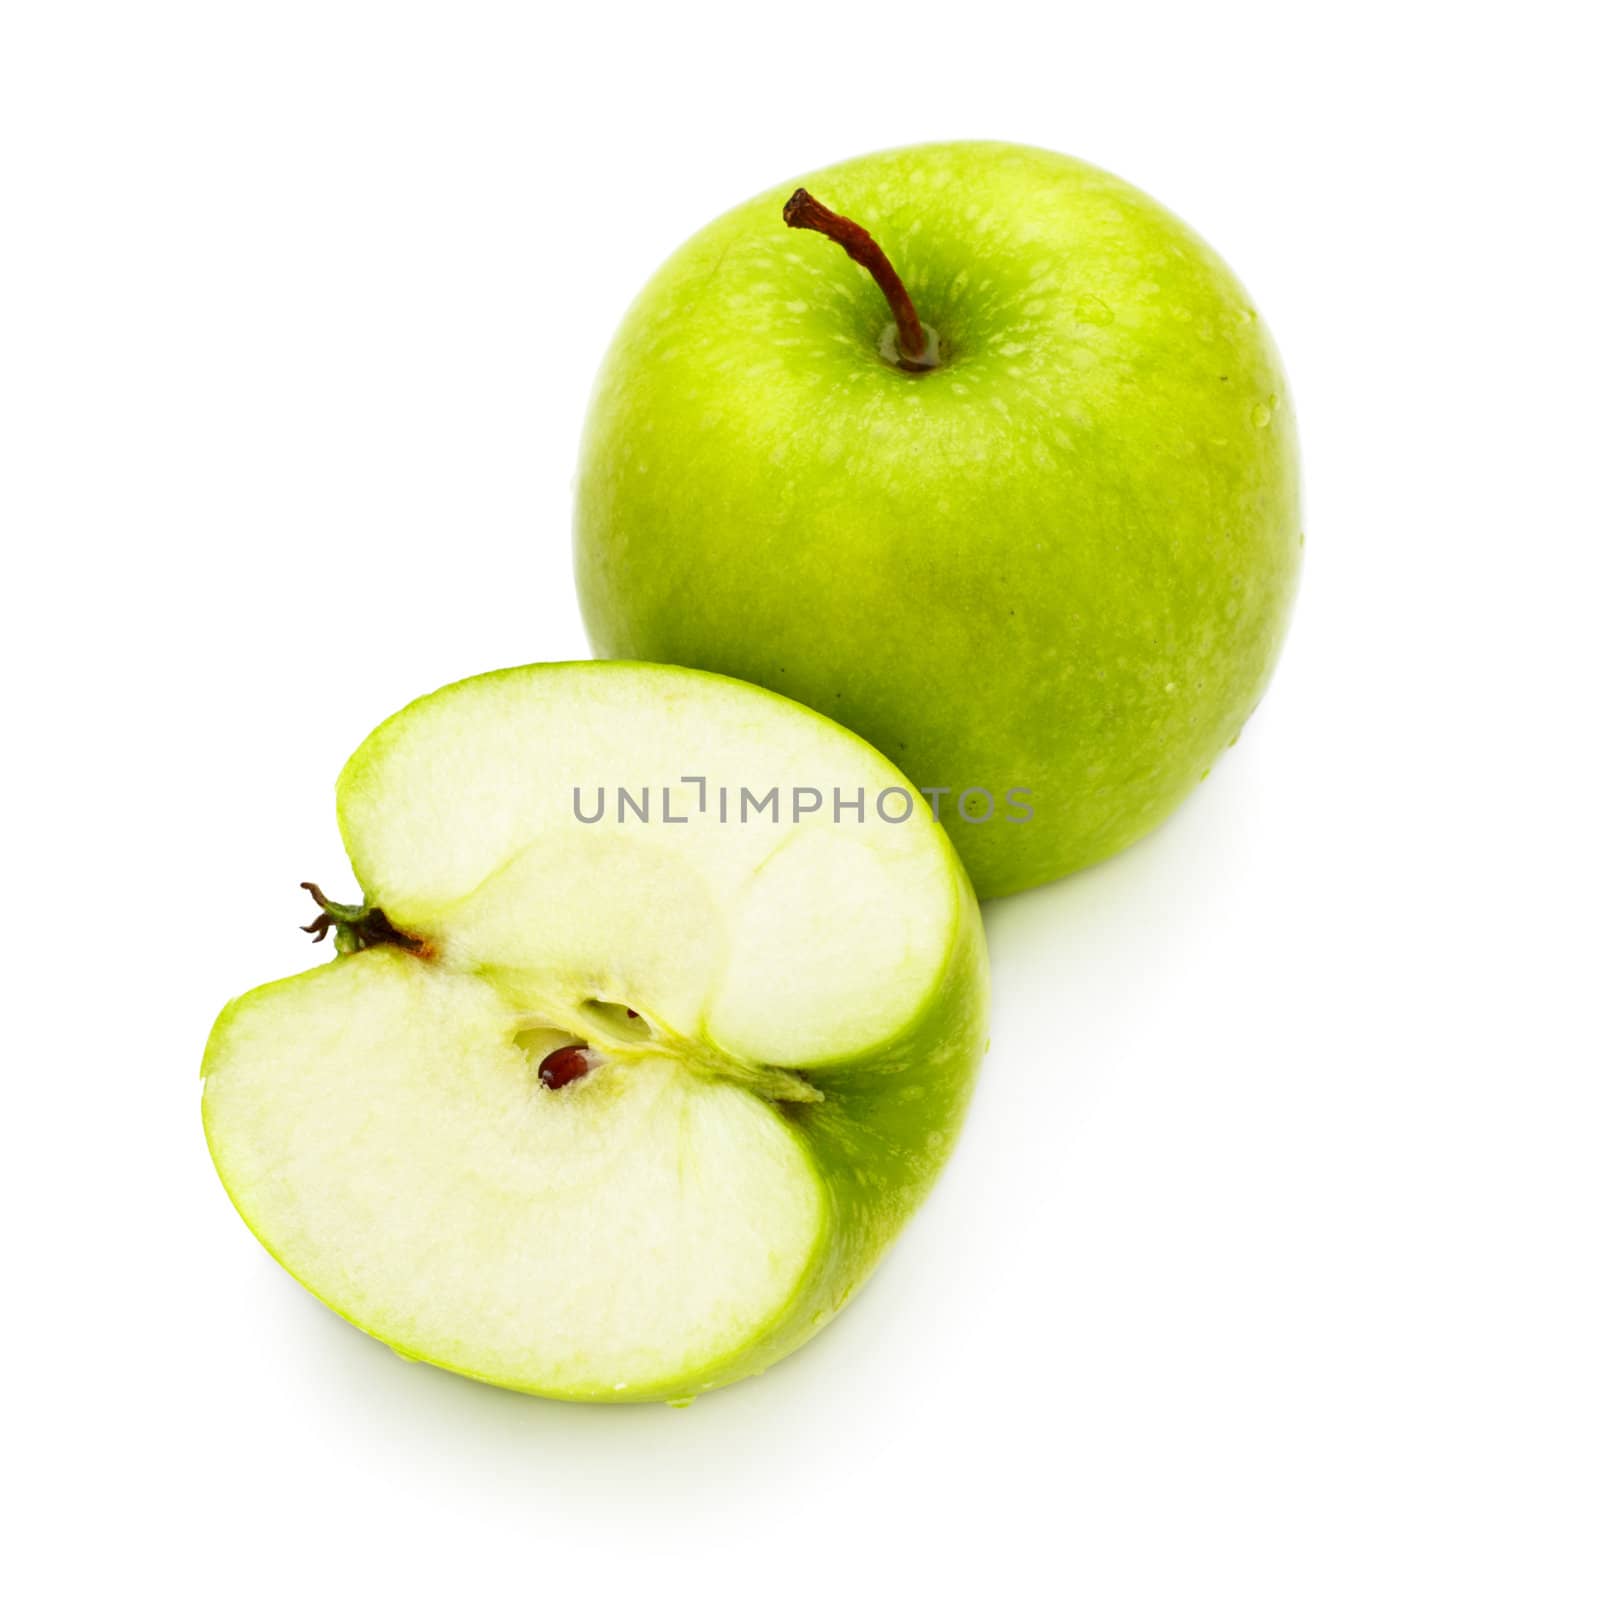 fresh green apples isolated on white background